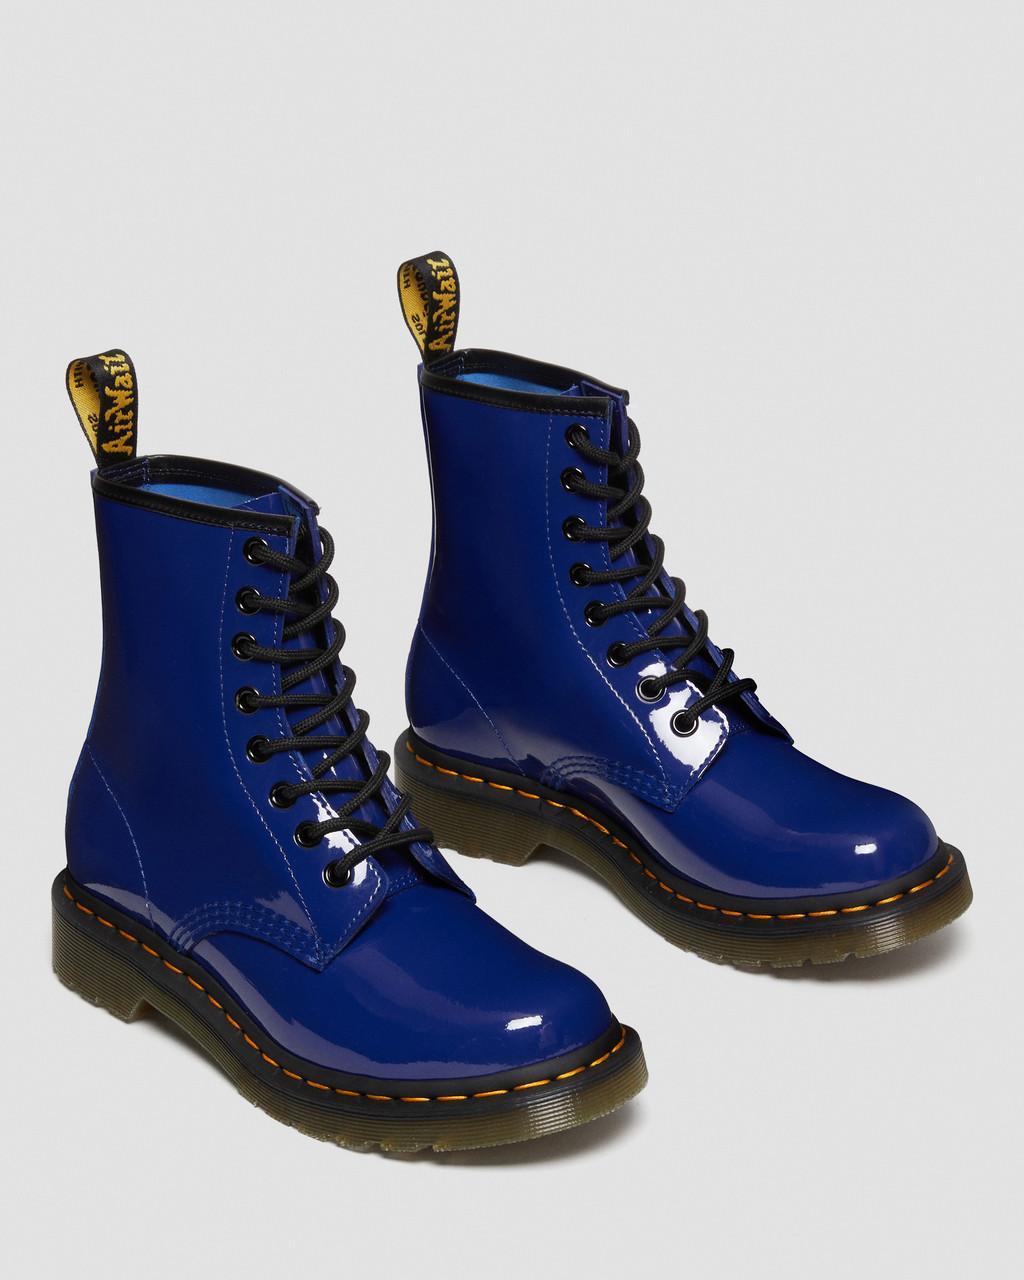 Dr. Martens 1460 Women's Patent Leather Lace Up Boots in Blue | Lyst